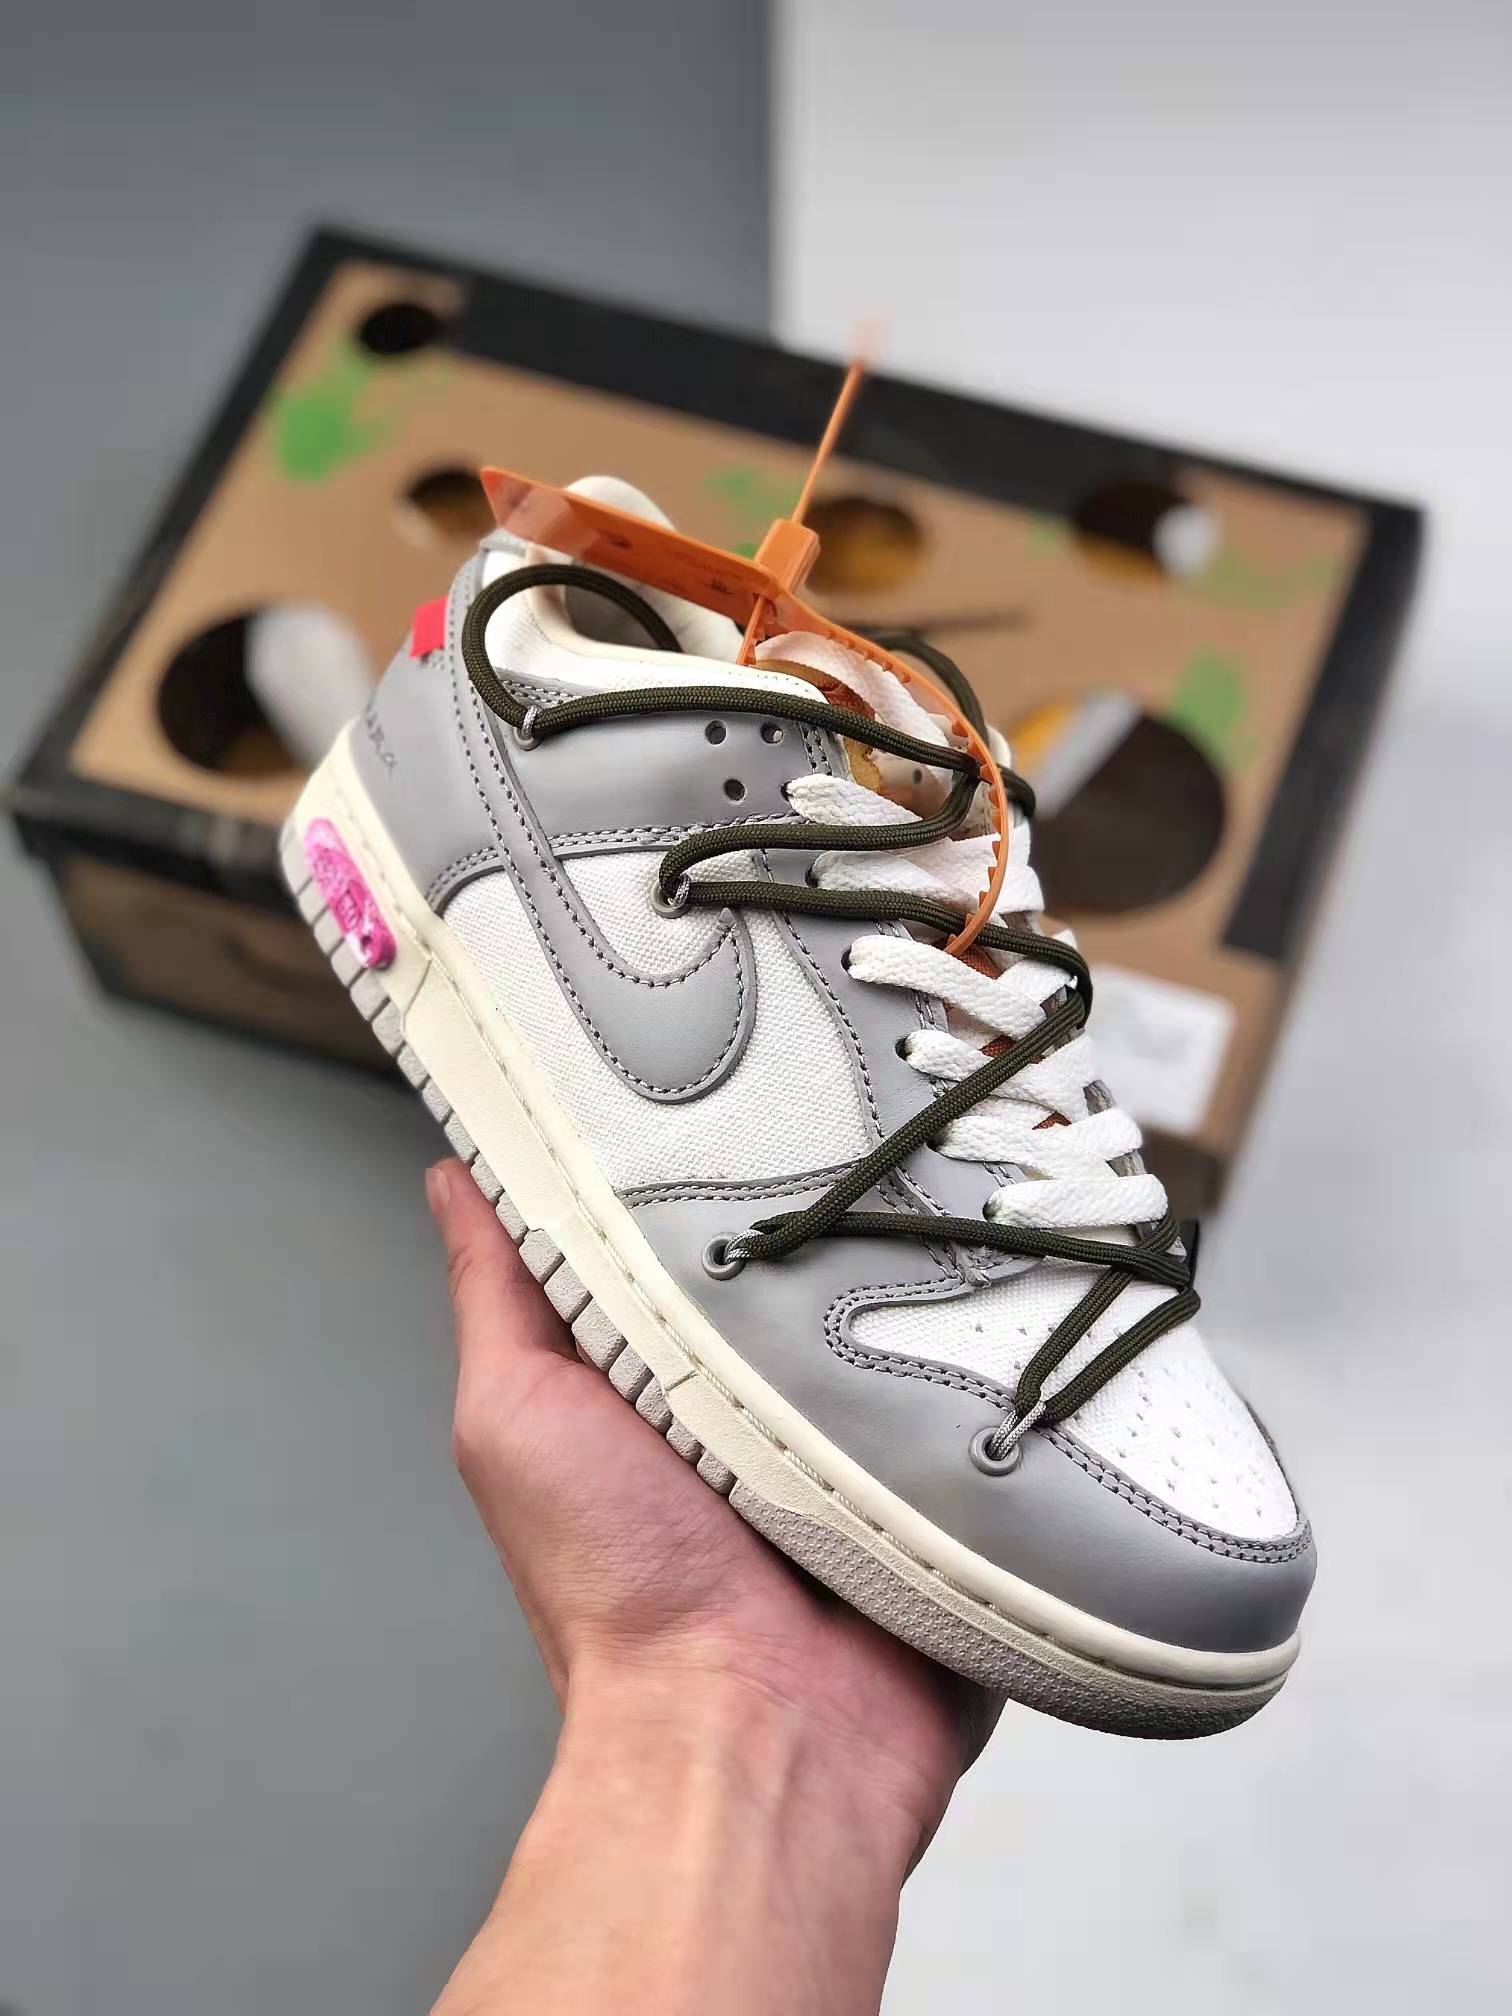 Nike Off-White Dunk Low 'Lot 14 of 50' DJ0950-106 - Limited Edition Collaboration Sneakers